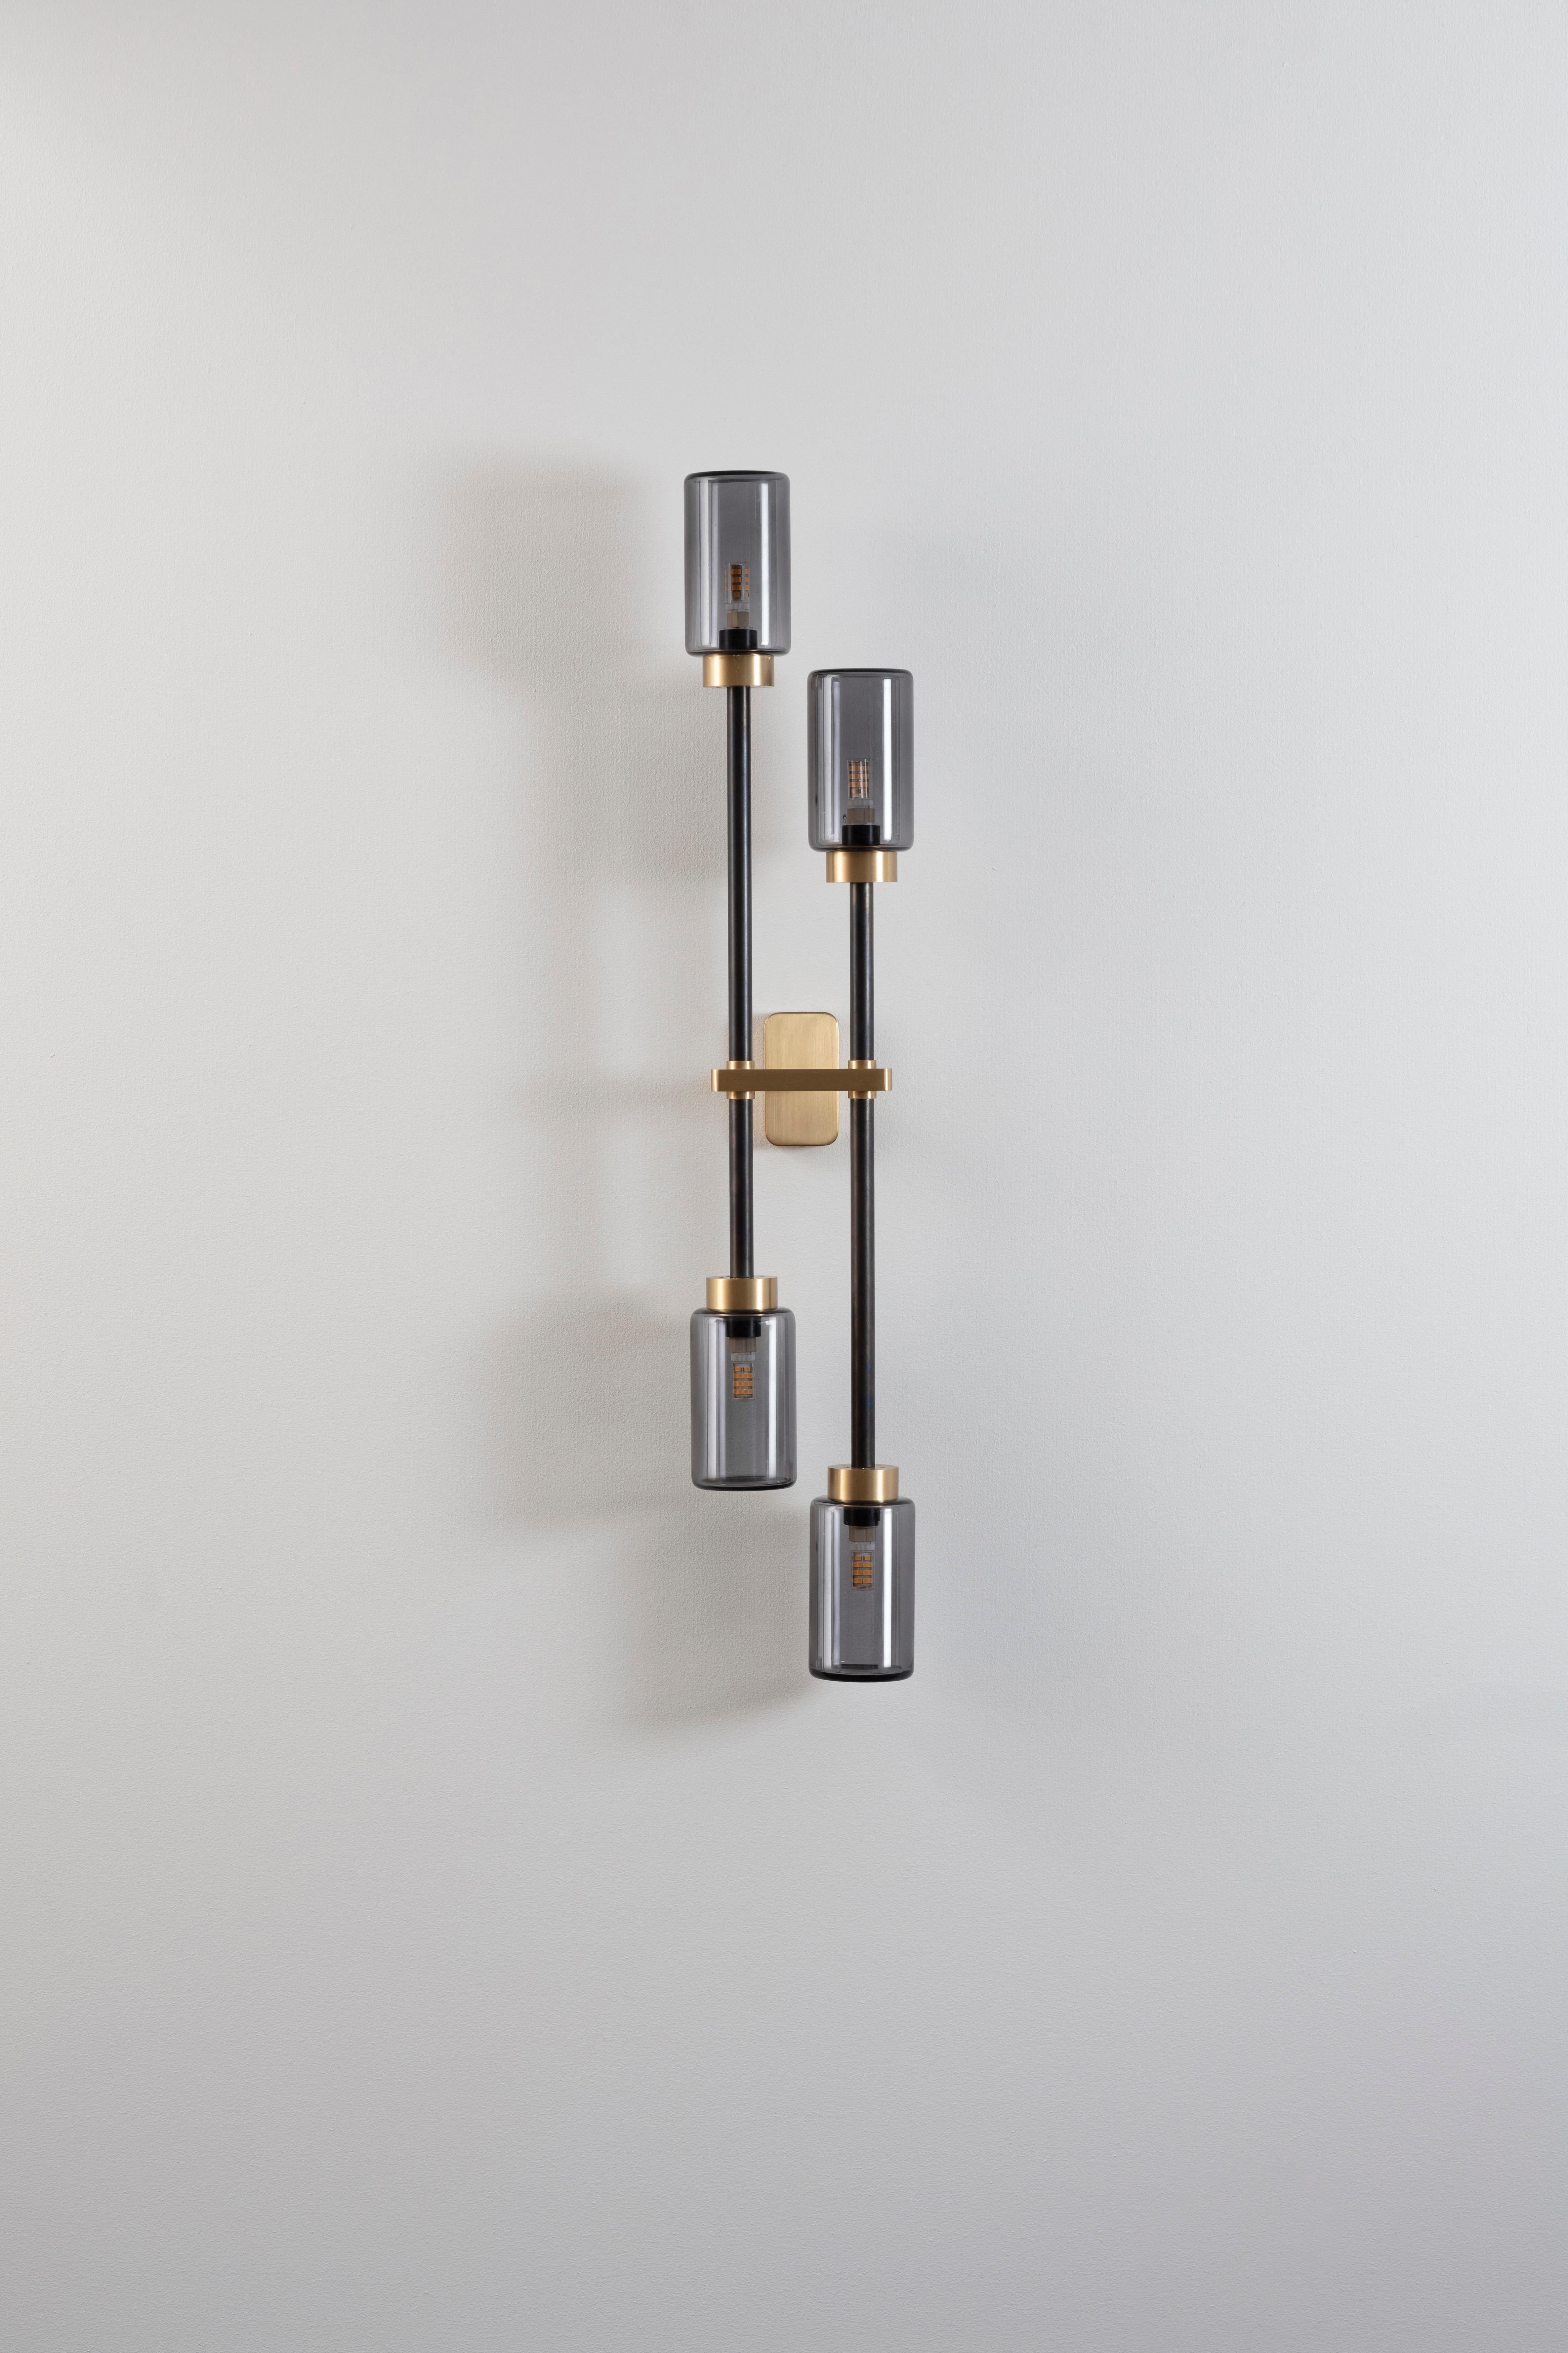 Smoked Farol bouble wall light by Bert Frank
Dimensions: H 79 x W 15 x D 7 cm
Materials: Brass, bronze

Available finishes: Bronzed brass, black brass
All our lamps can be wired according to each country. If sold to the USA it will be wired for